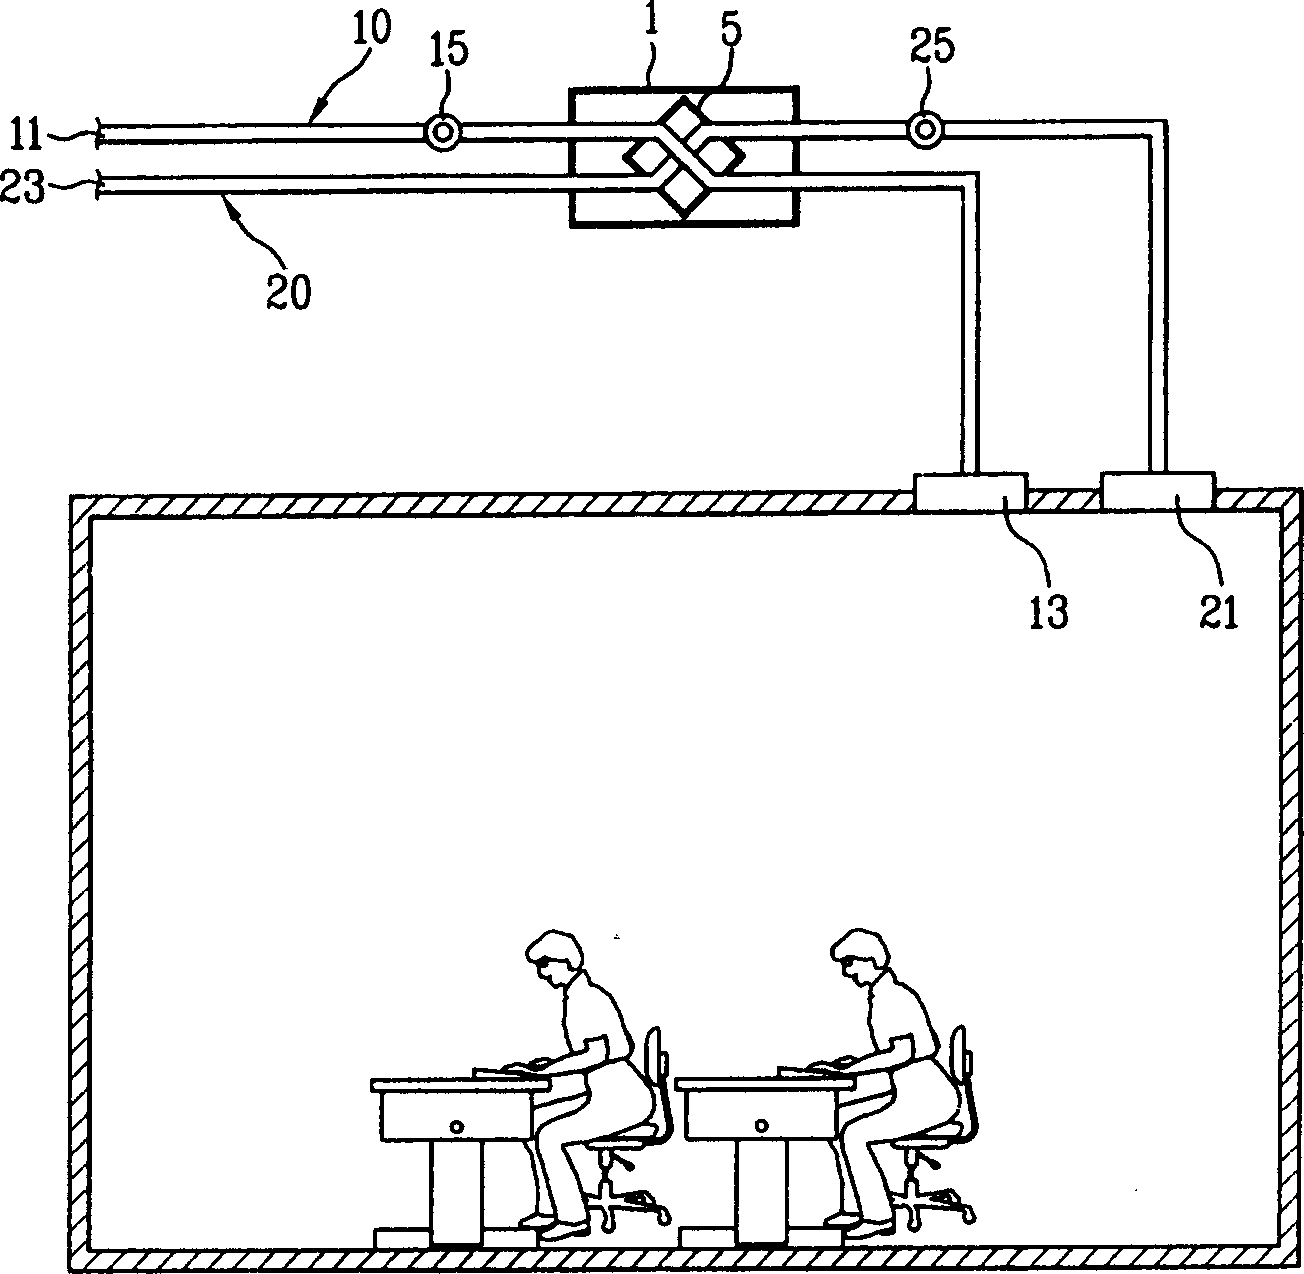 Ventilation system integrated with air cleaning equipment